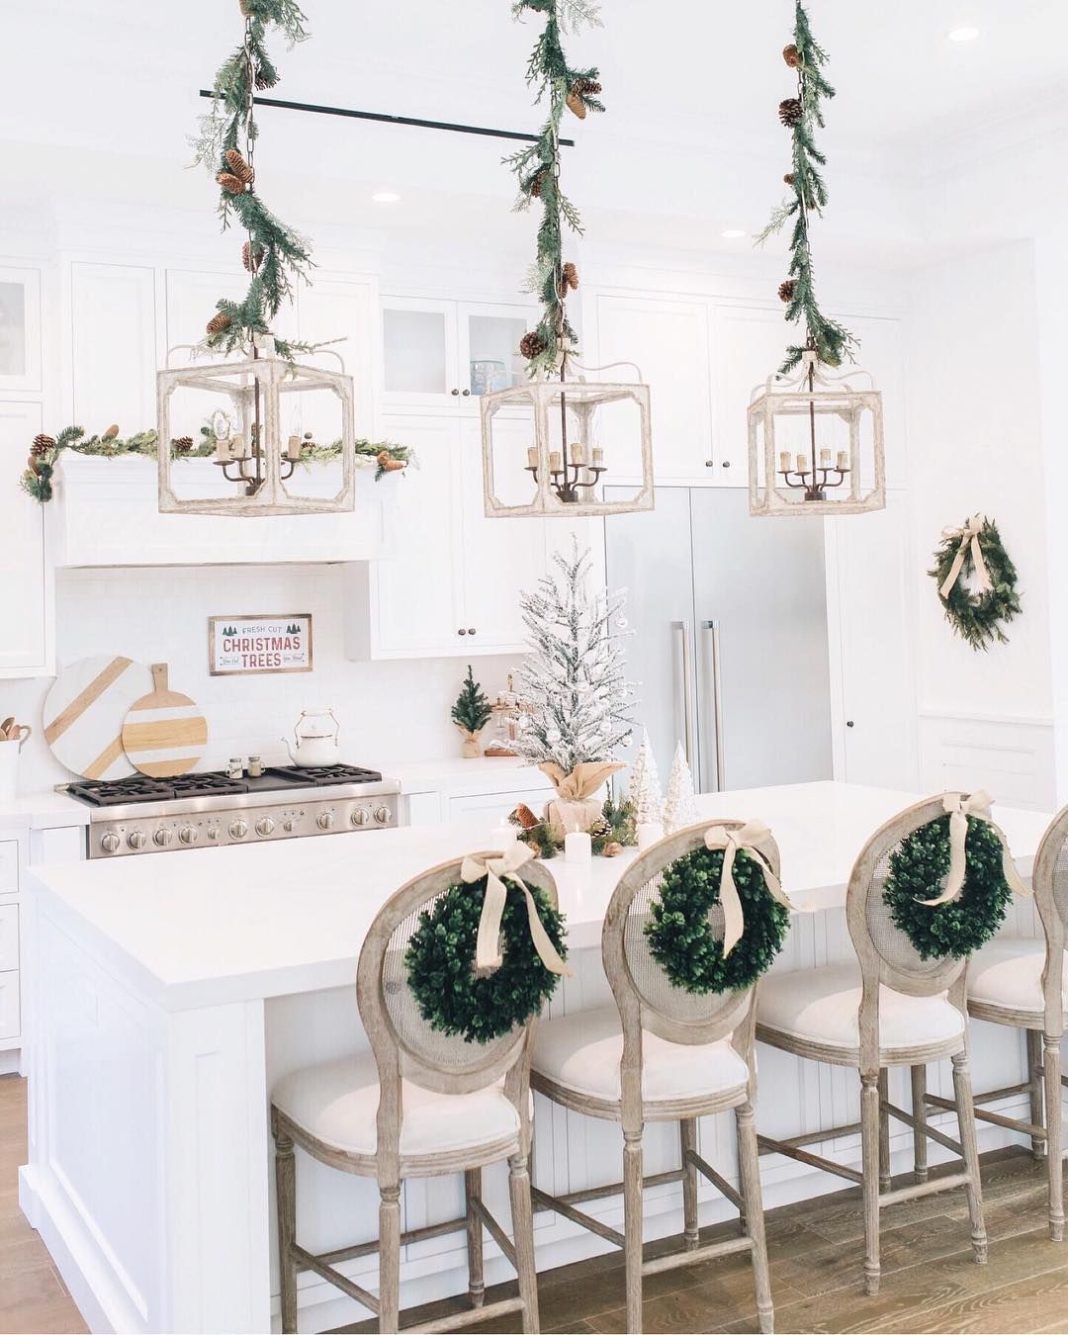 15 Ways to Decorate with Greenery for the Holidays - The Striped Barn